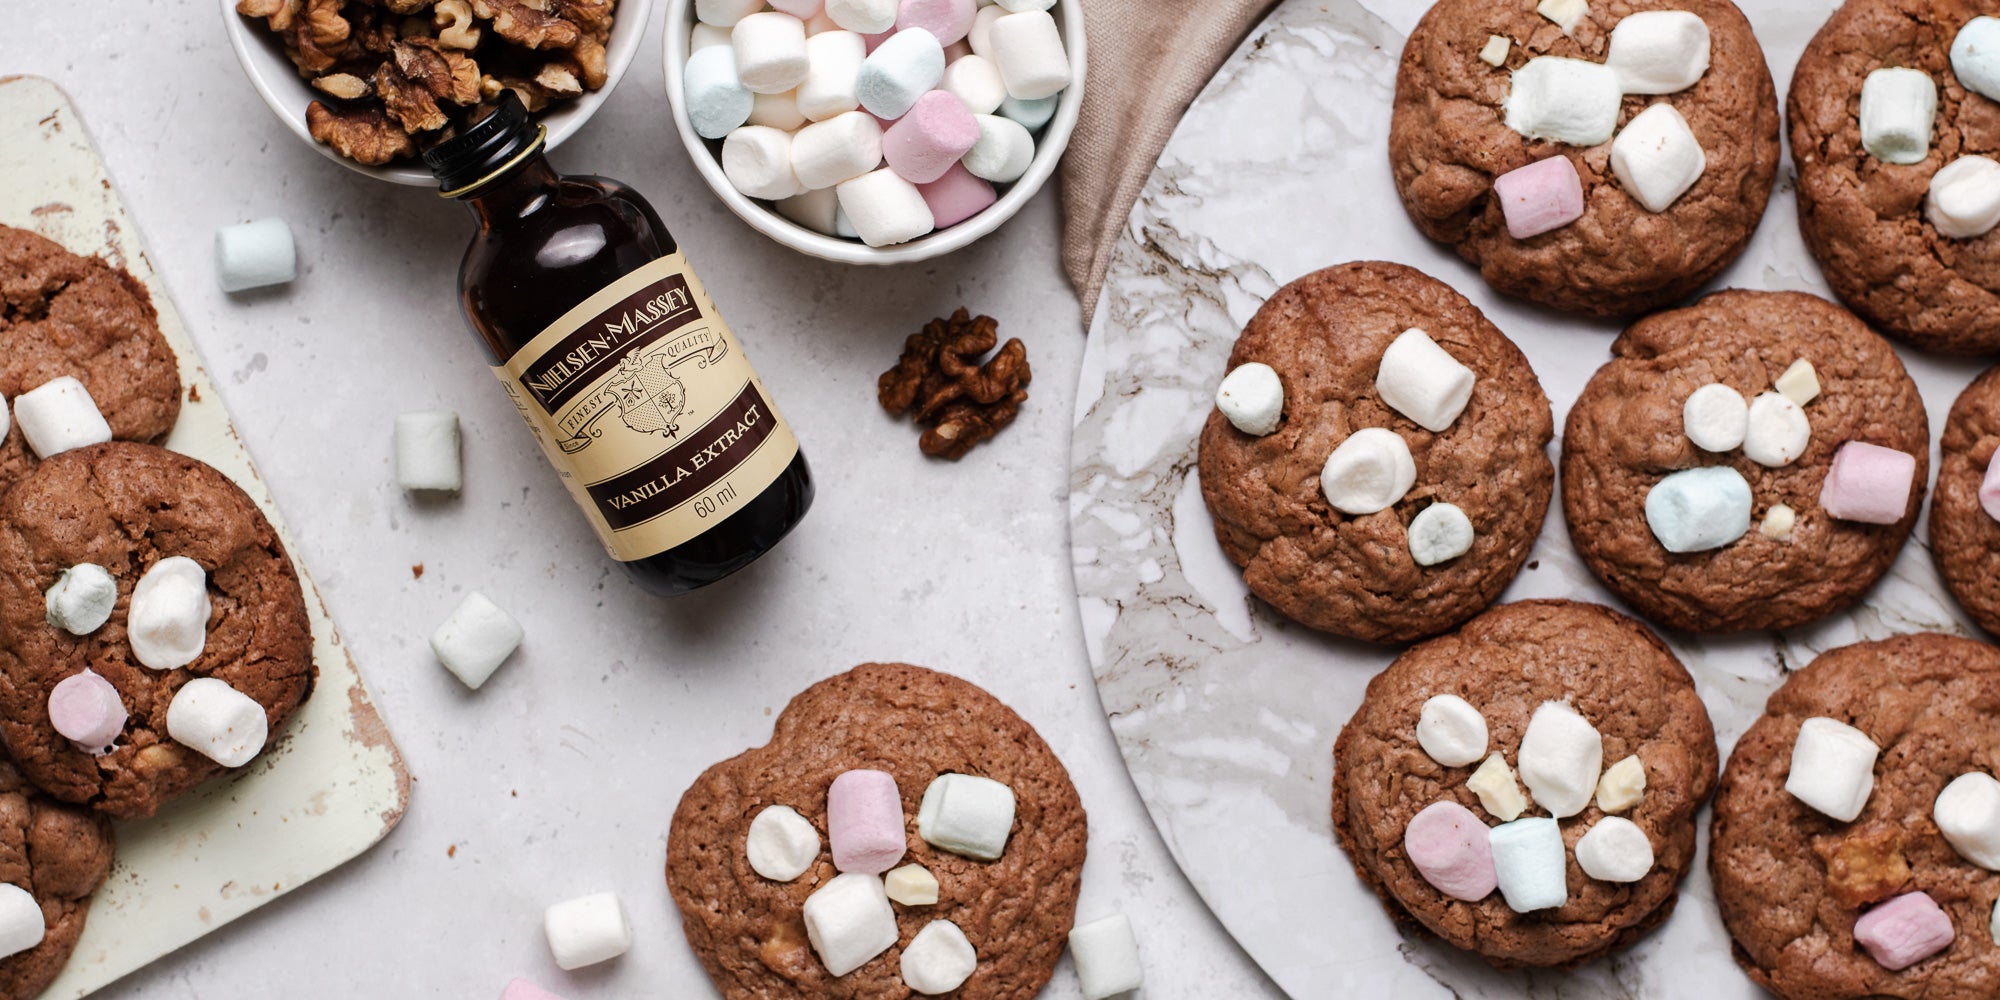 A batch of Rocky Road Cookies lay next to a bottle of Neilsen-Massey vanilla extract and a ramekin of mini marshmallows